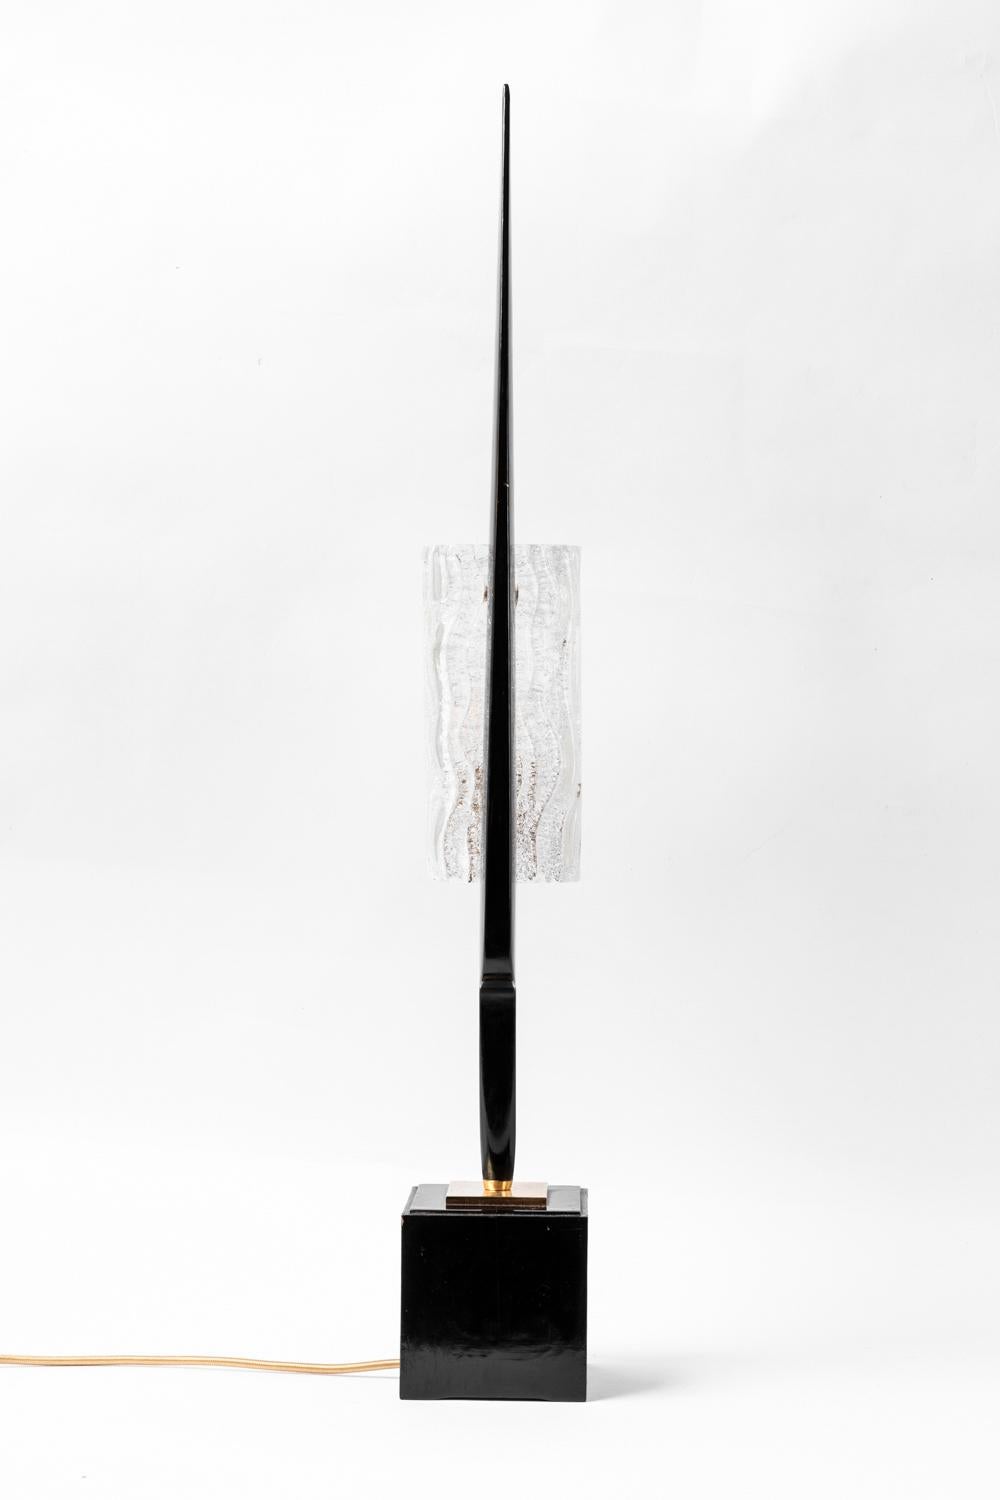 Maison Arlus, attributed.
Lamp in black lacquered wood and glass. Cubic base in black lacquered wood supporting a black slim form in which a rectangular thick lampshade in glass, carved with waves patterns, is inscribed in.

Work realized in the